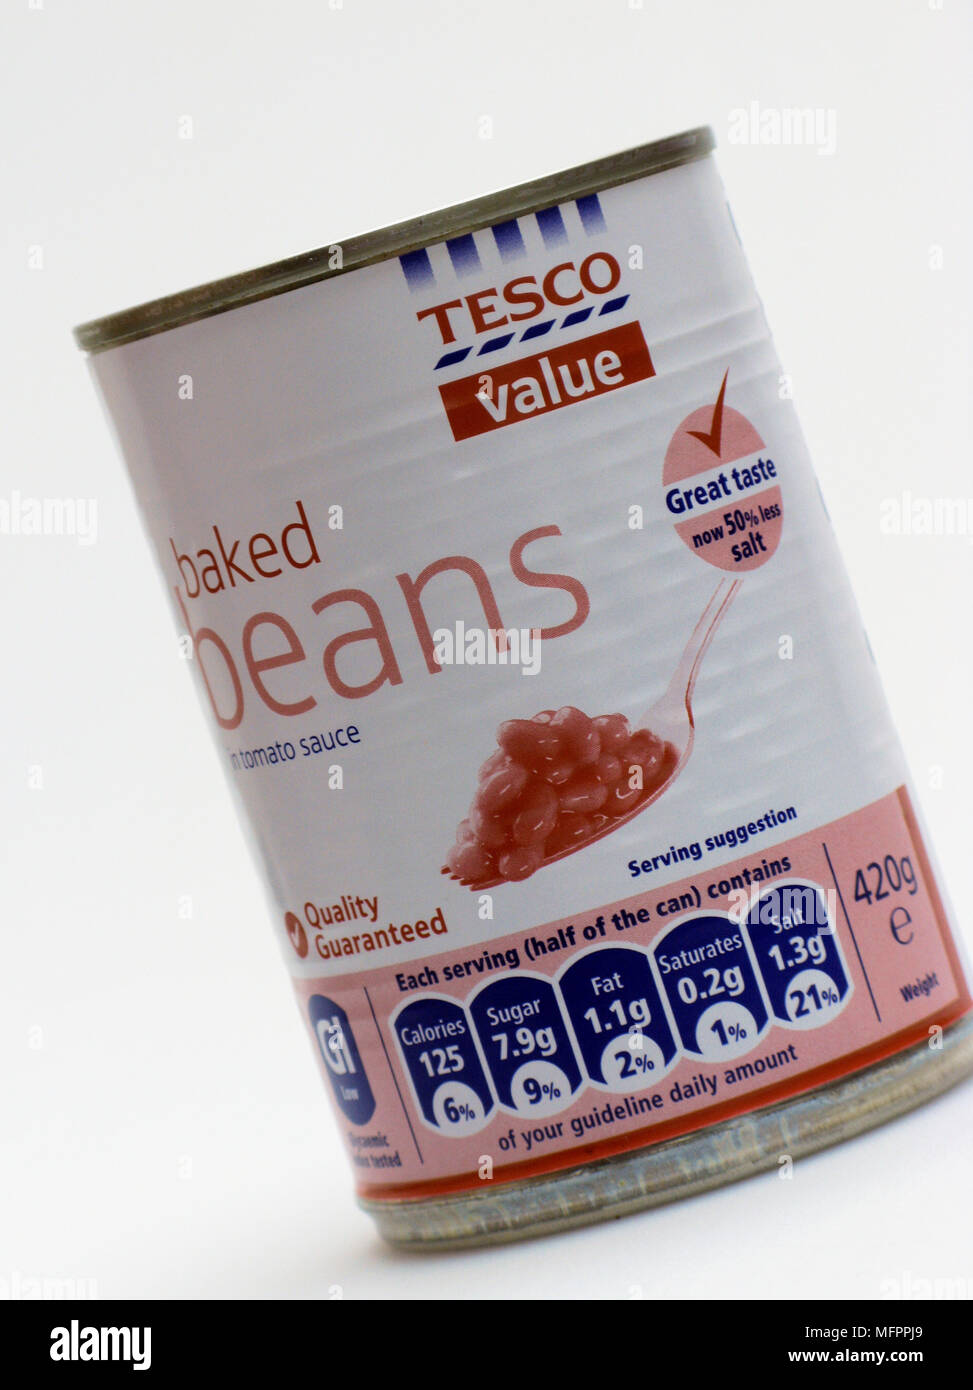 Tesco Value baked beans, products of a cheap reasonable range of